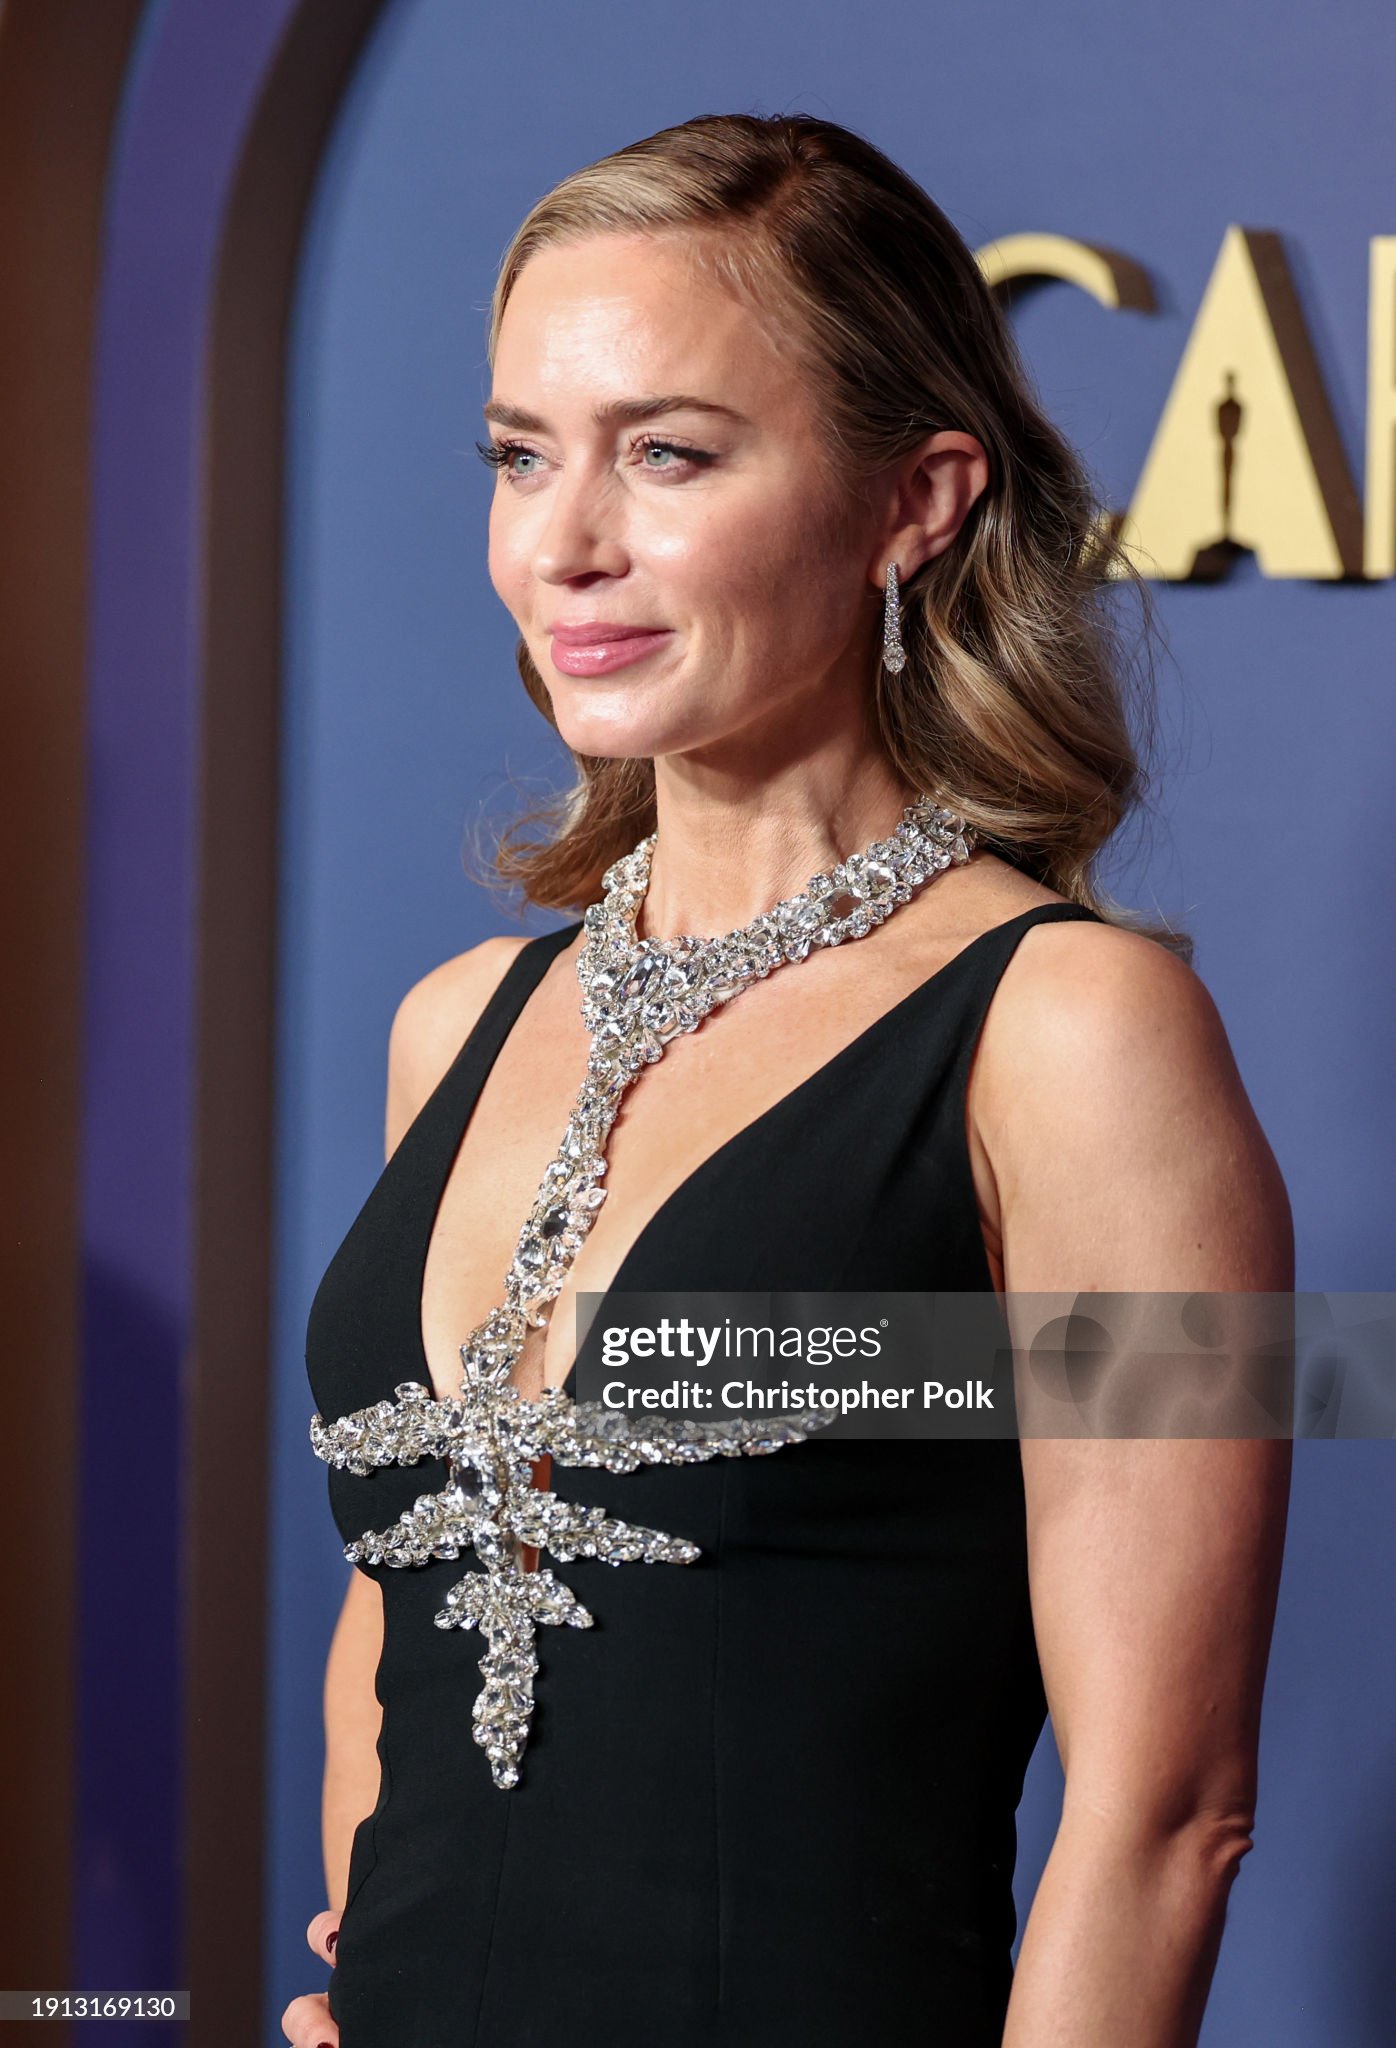 emily-blunt-at-the-14th-governors-awards